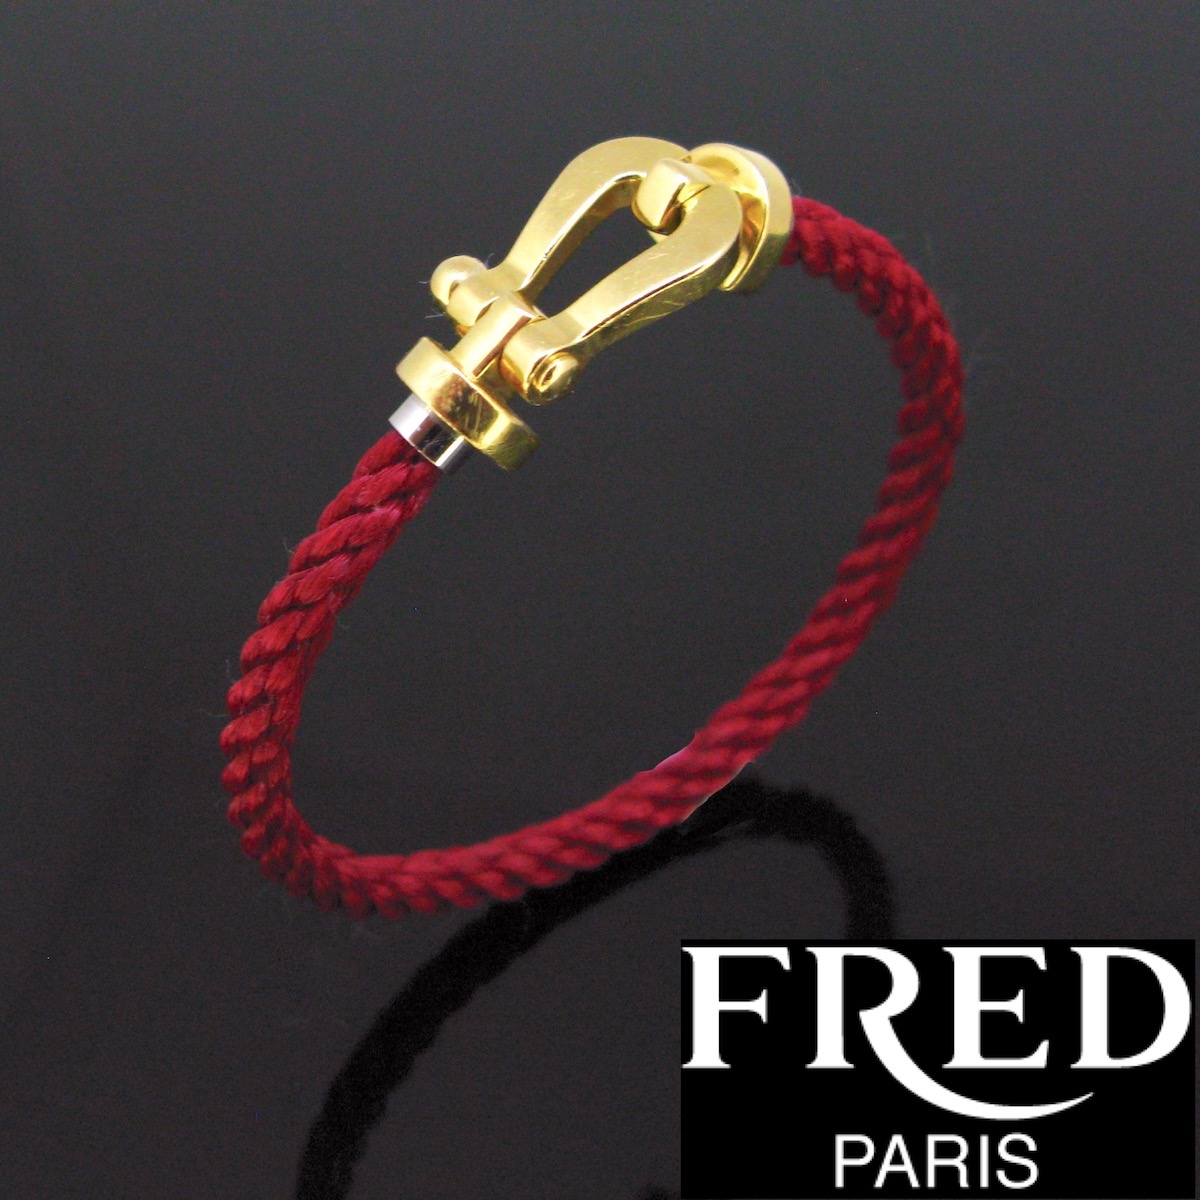 FRED Paris on Instagram: “The #Force10 bracelet in yellow gold and